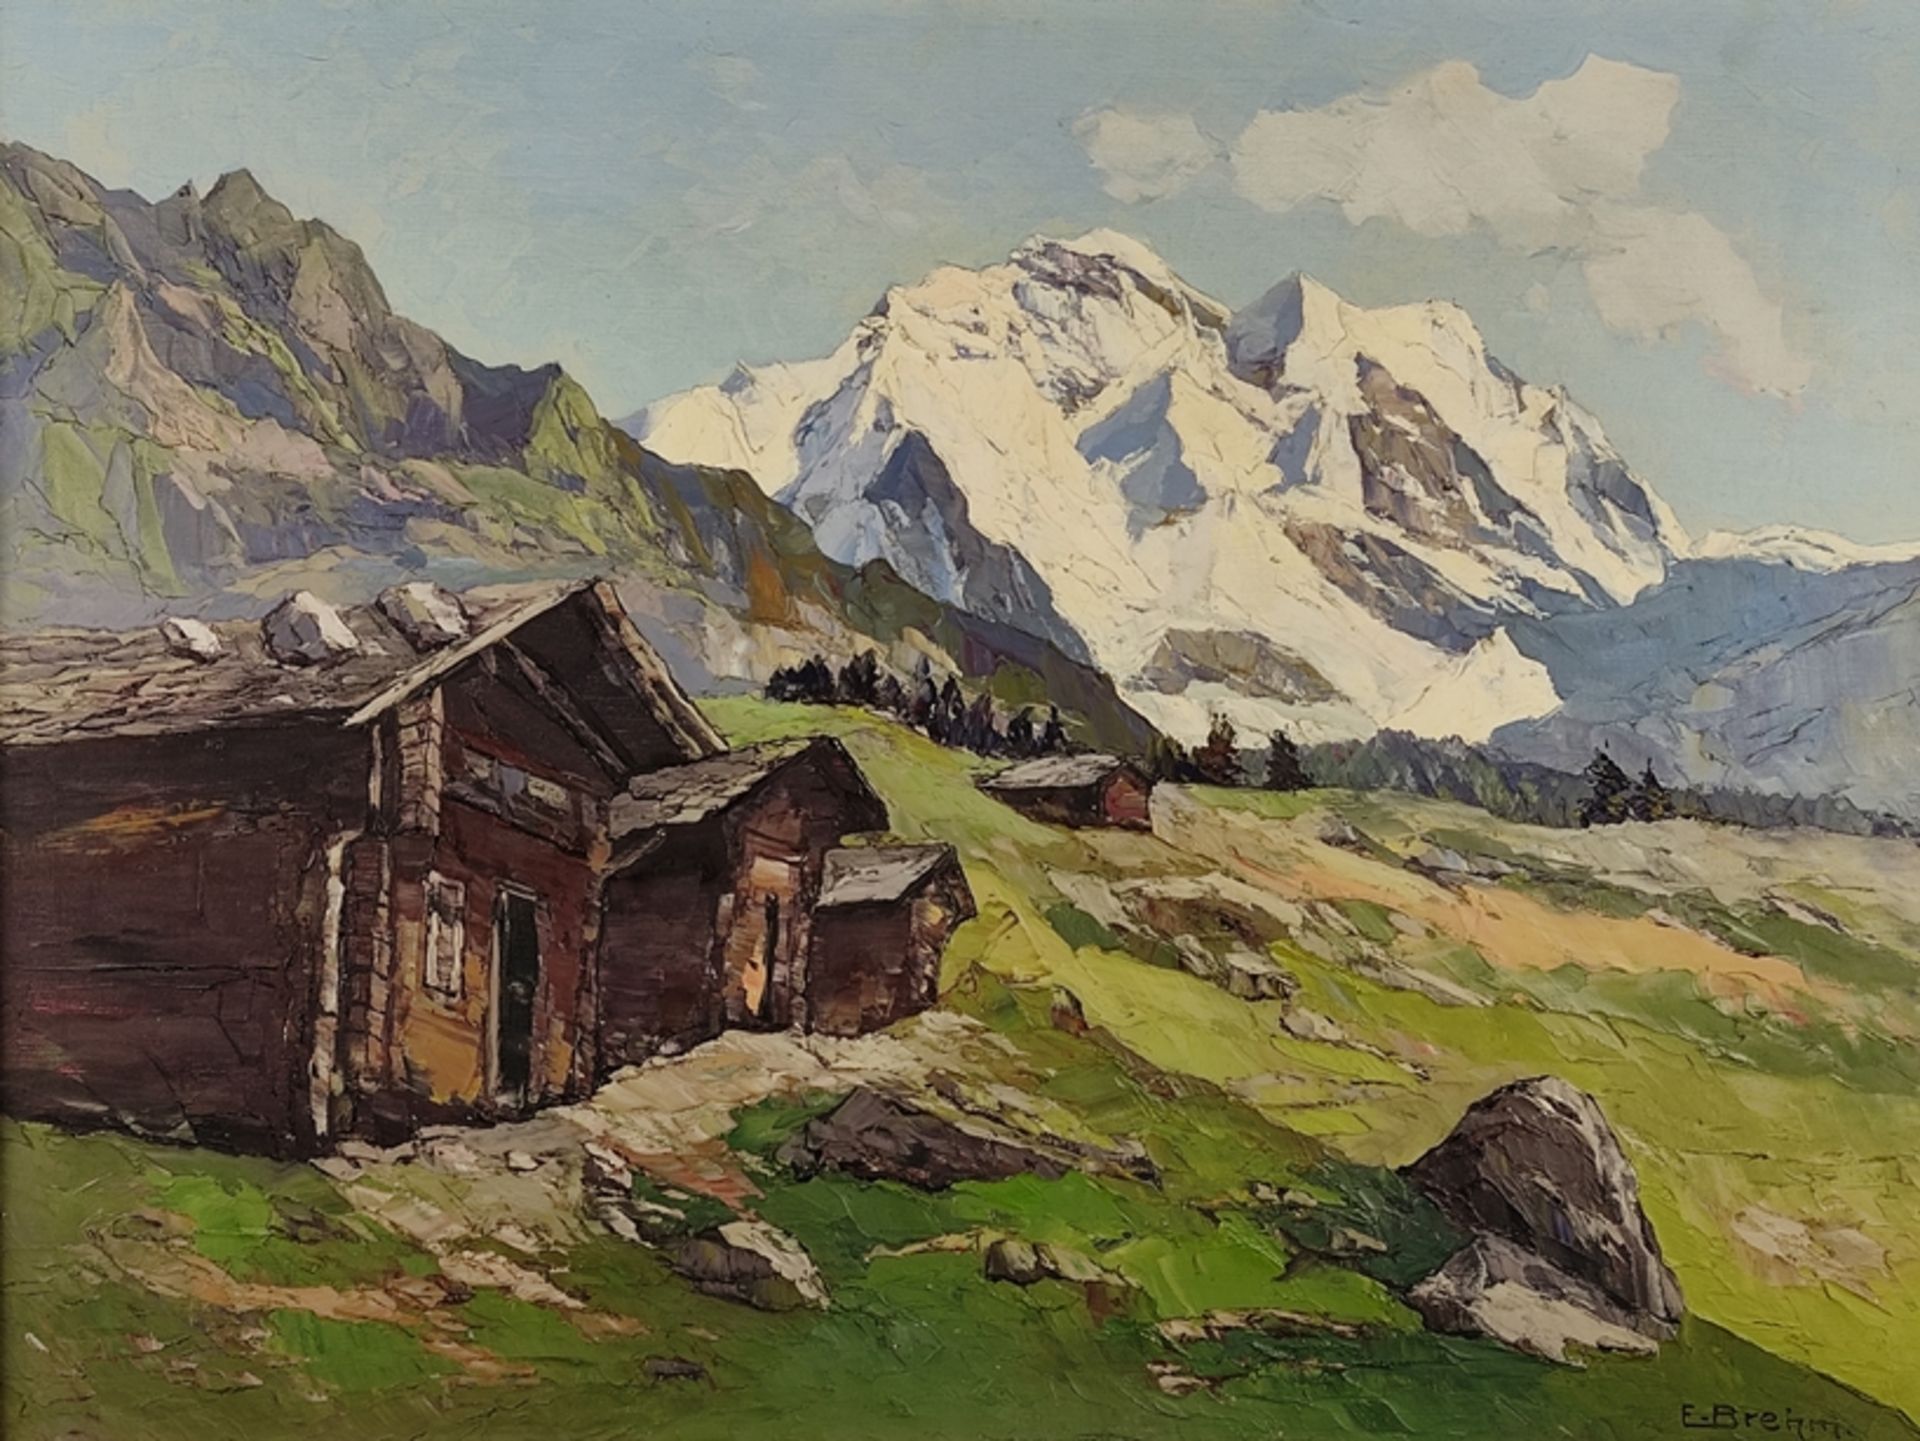 Brehm, Emil (1880-1954 Munich) "Jungfrau in Wengen", with an alpine hut and mountain panorama, oil 